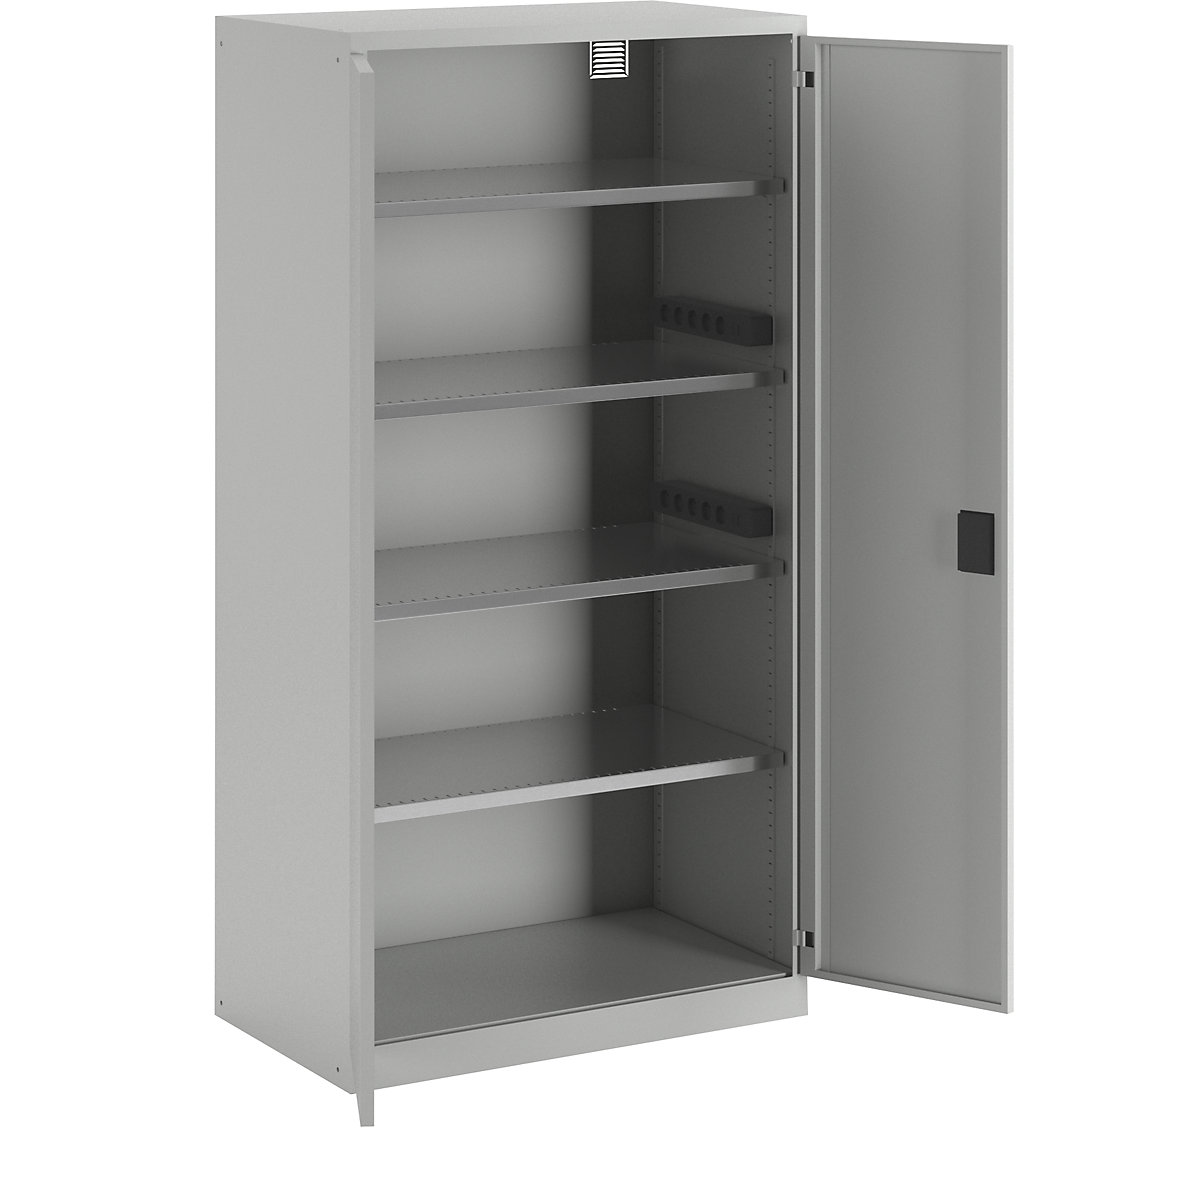 Battery charging cabinet – LISTA, 4 shelves, solid panel doors, 2 power strips at side, grey-22